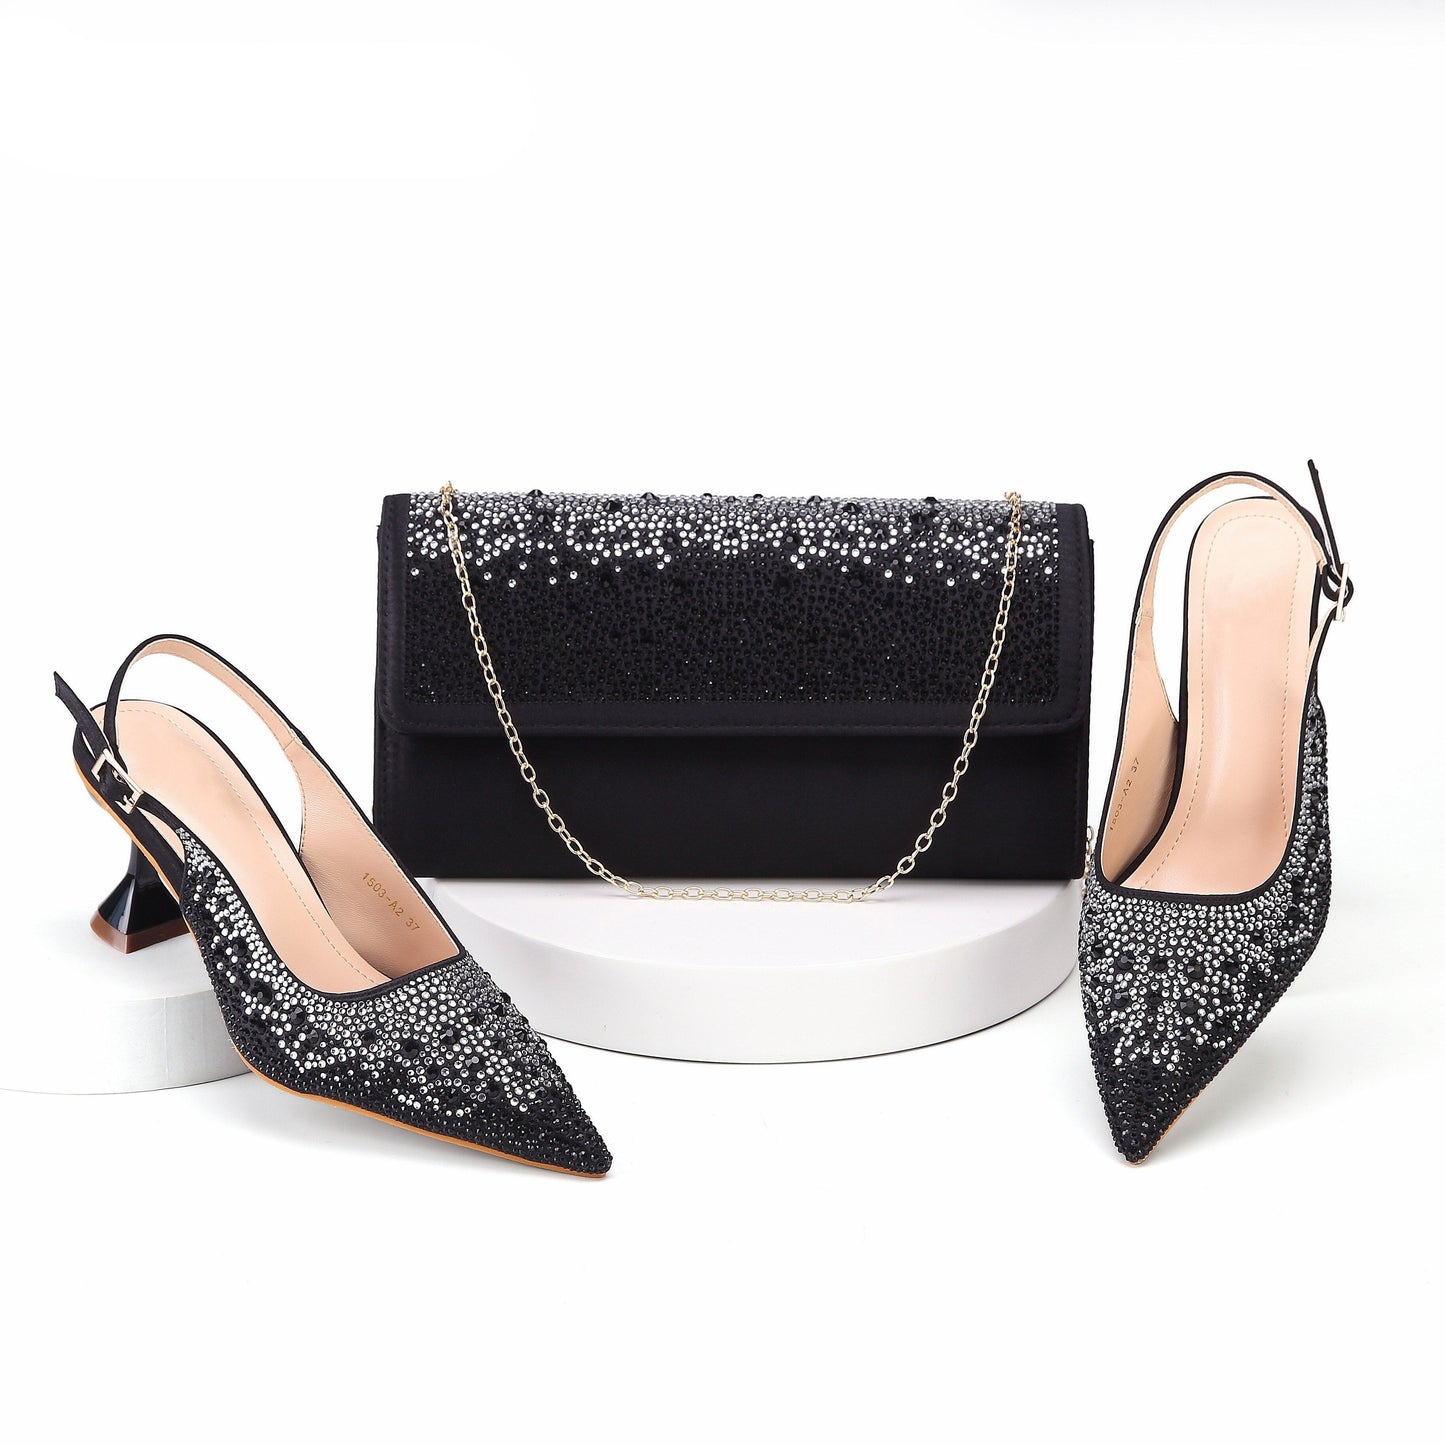 Heels Pointed Toe Shoes Matching Bag Set For Women Wedding Party Pump